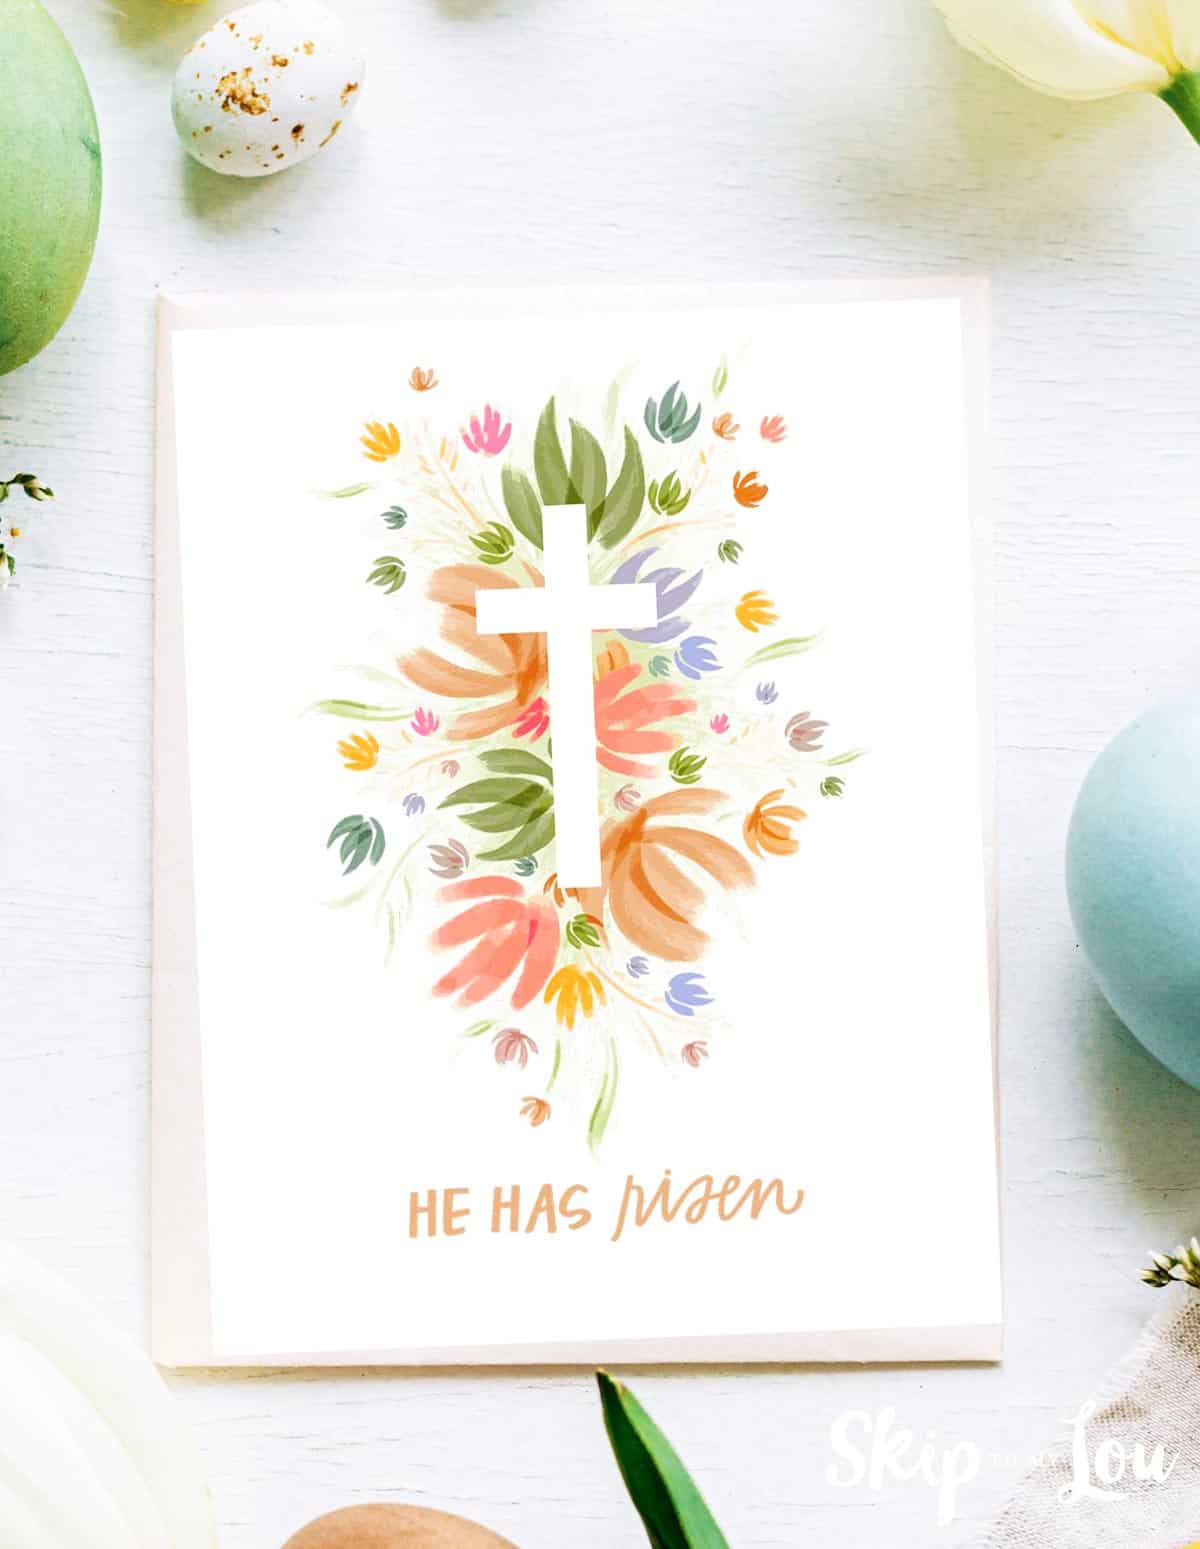 Image shows a Happy Easter he has risen greeting card with a colorful cross in the middle and surrounded by Easter decoration.